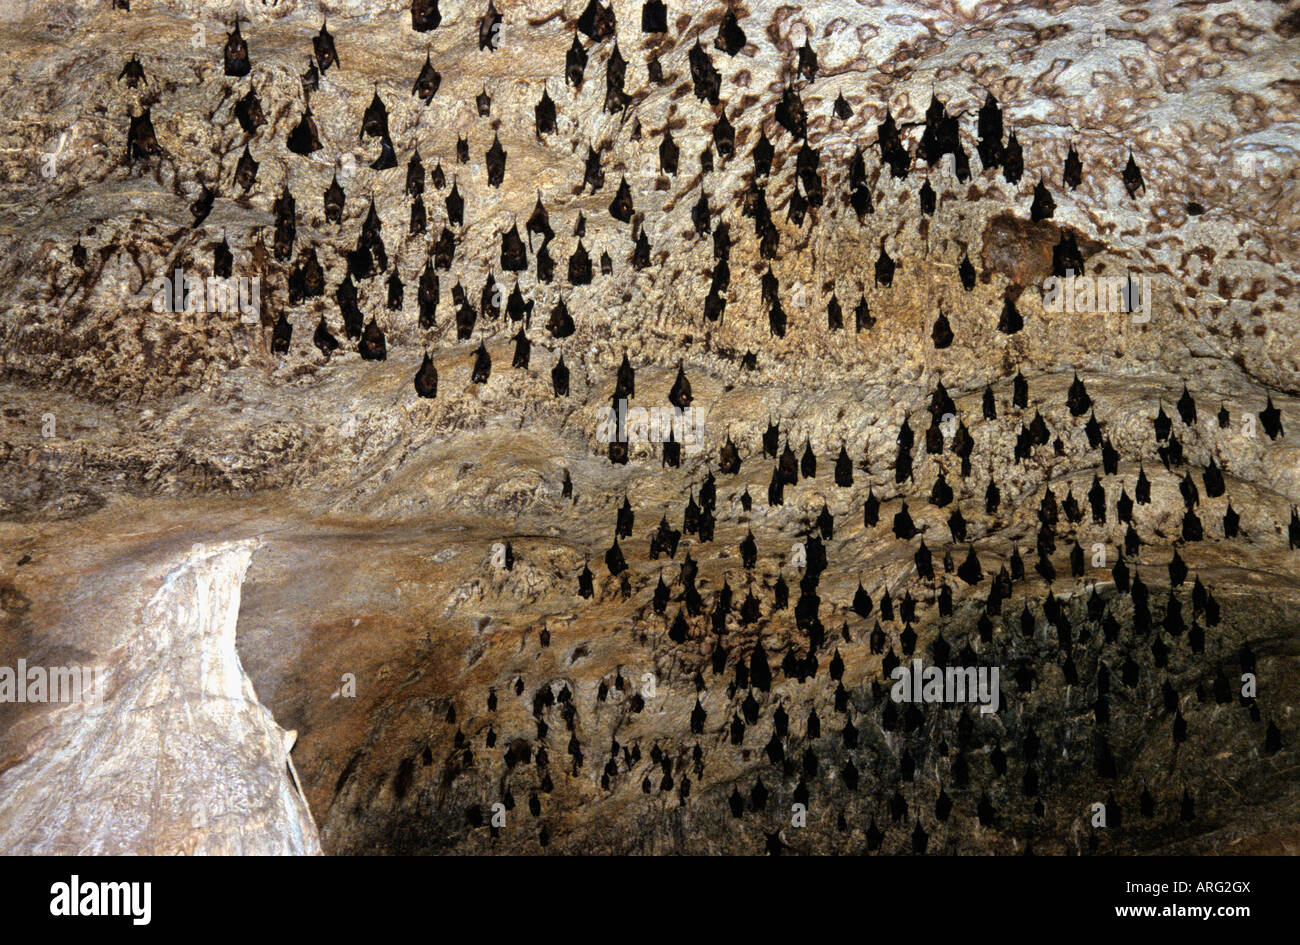 Fruit bats in a cave,Langkawi island,Malaysia Stock Photo